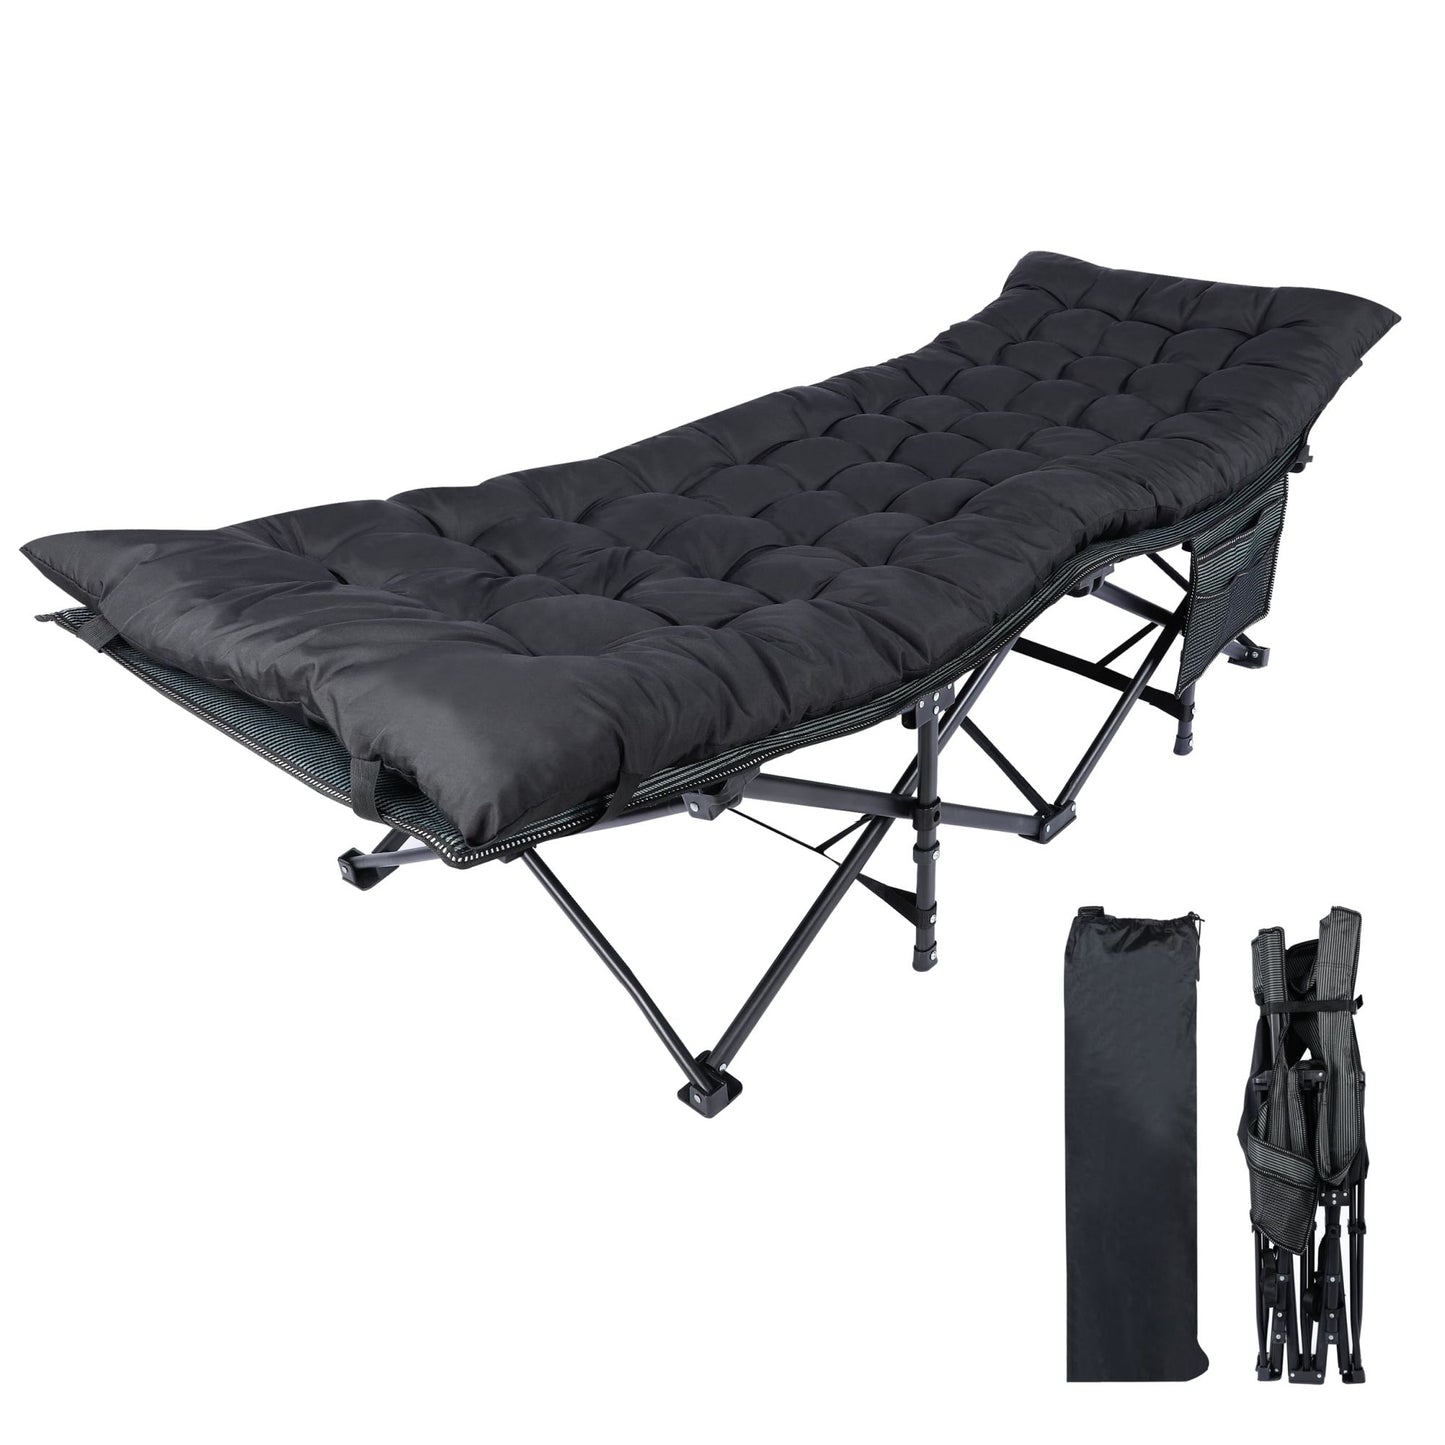 Foldable Outdoor with Portable Bag, Bed Lightweight Sleeping Cots for Camping, Black